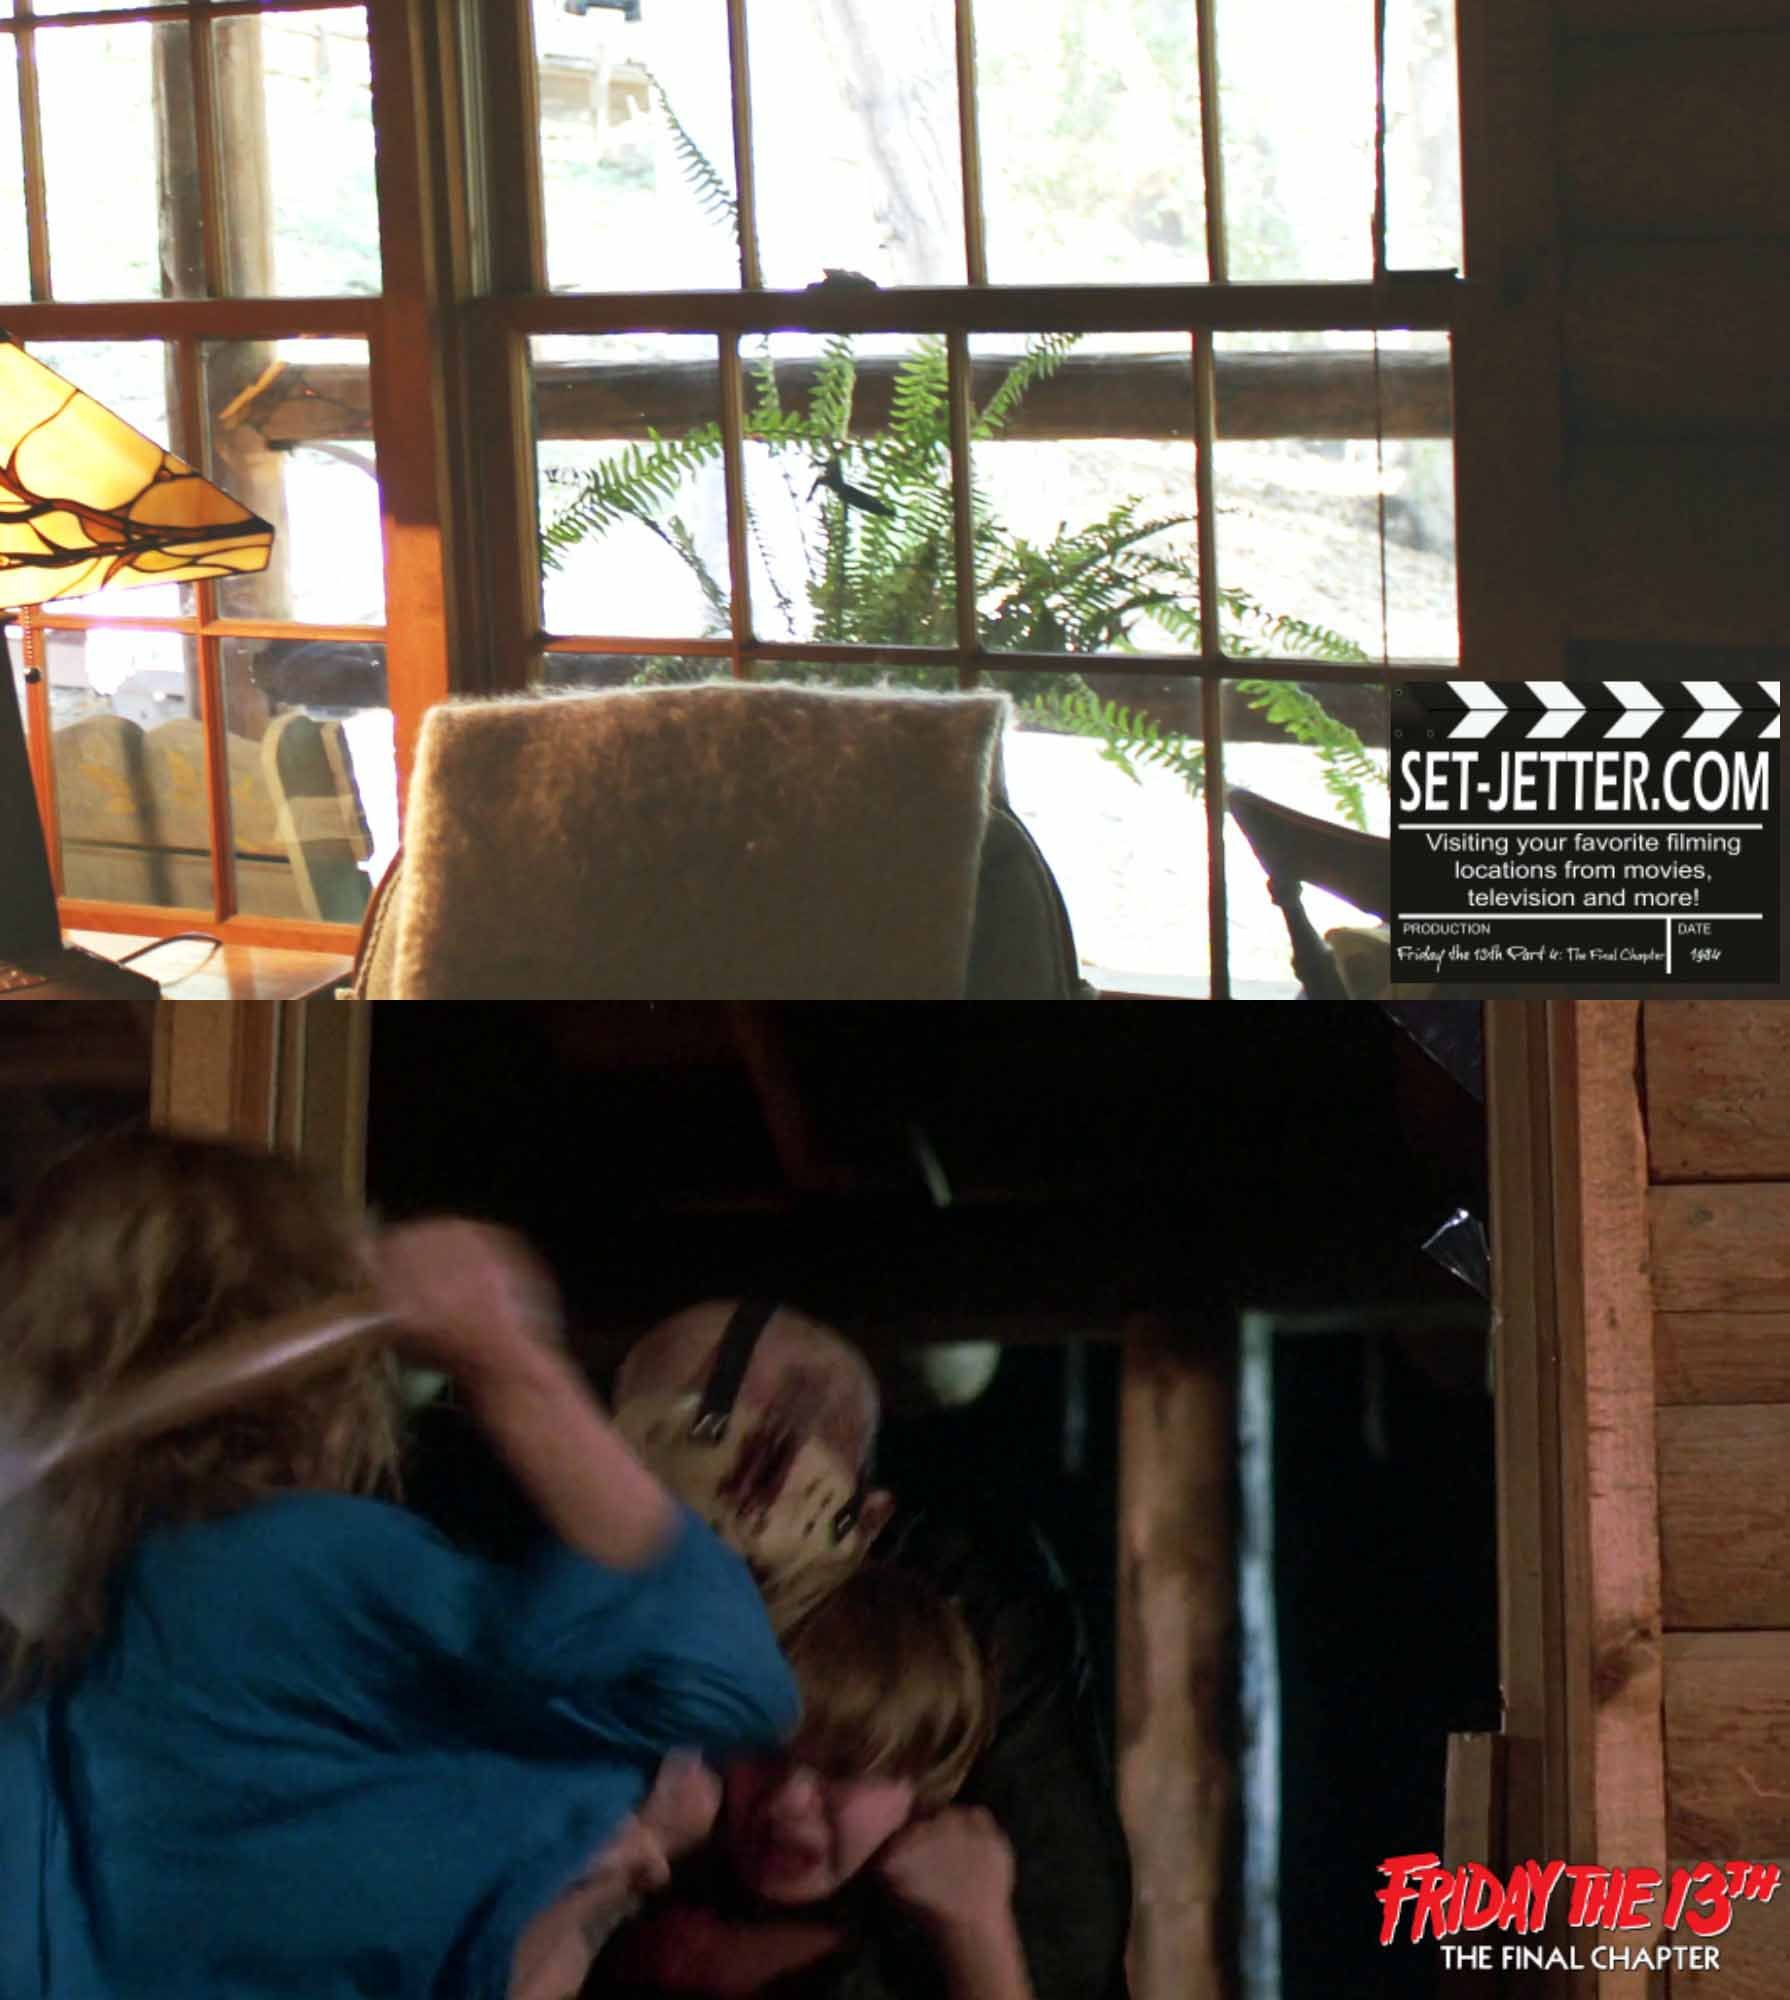 Friday the 13th The Final Chapter comparison 215.jpg